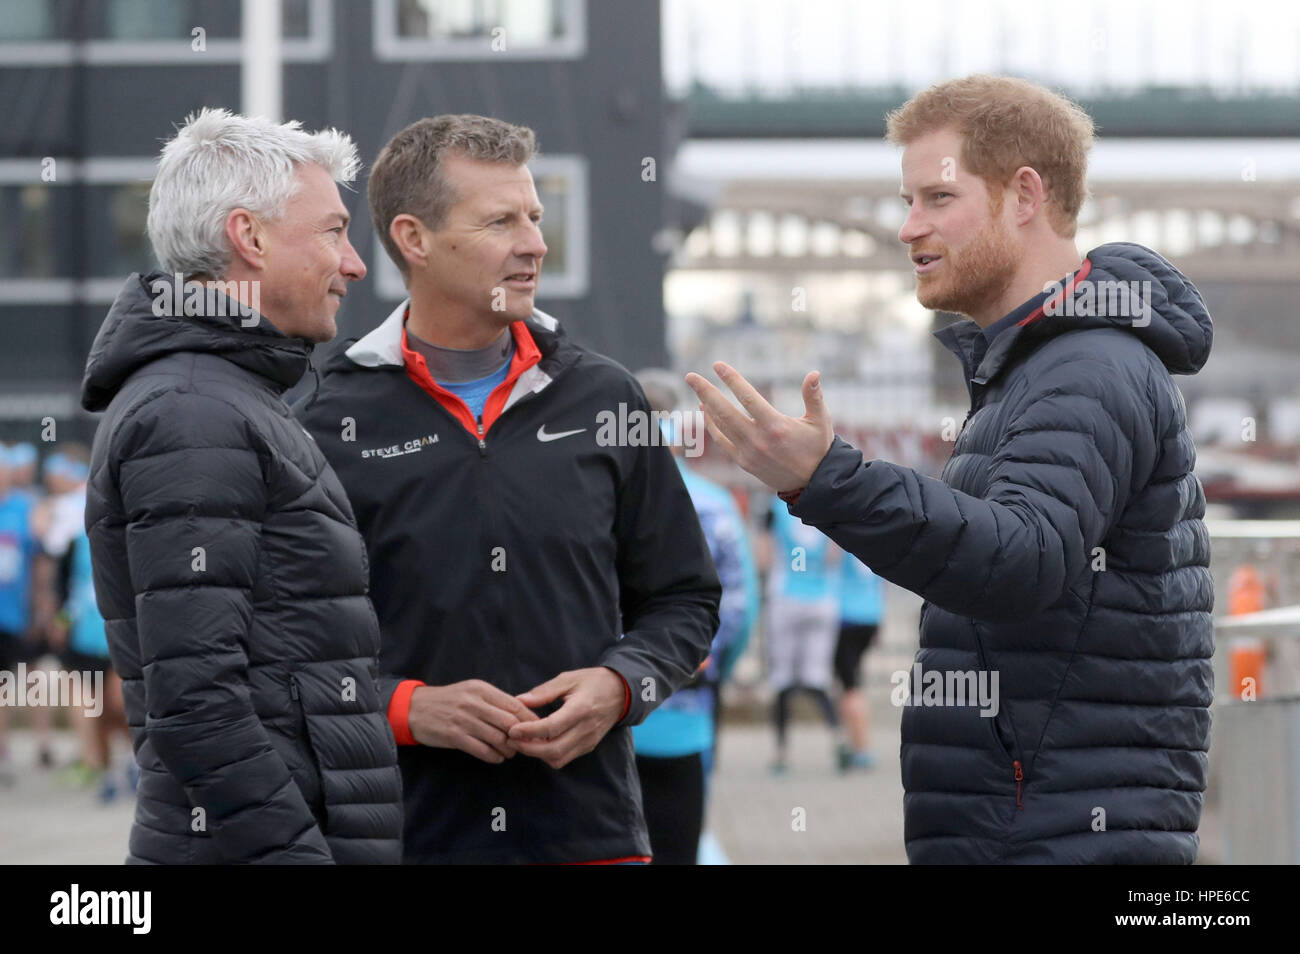 Prince Harry at the Quayside in Gateshead with Steve Cram and Jonathan Edwards as they train runners taking part in the London Marathon for mental health charity Heads Together. Stock Photo